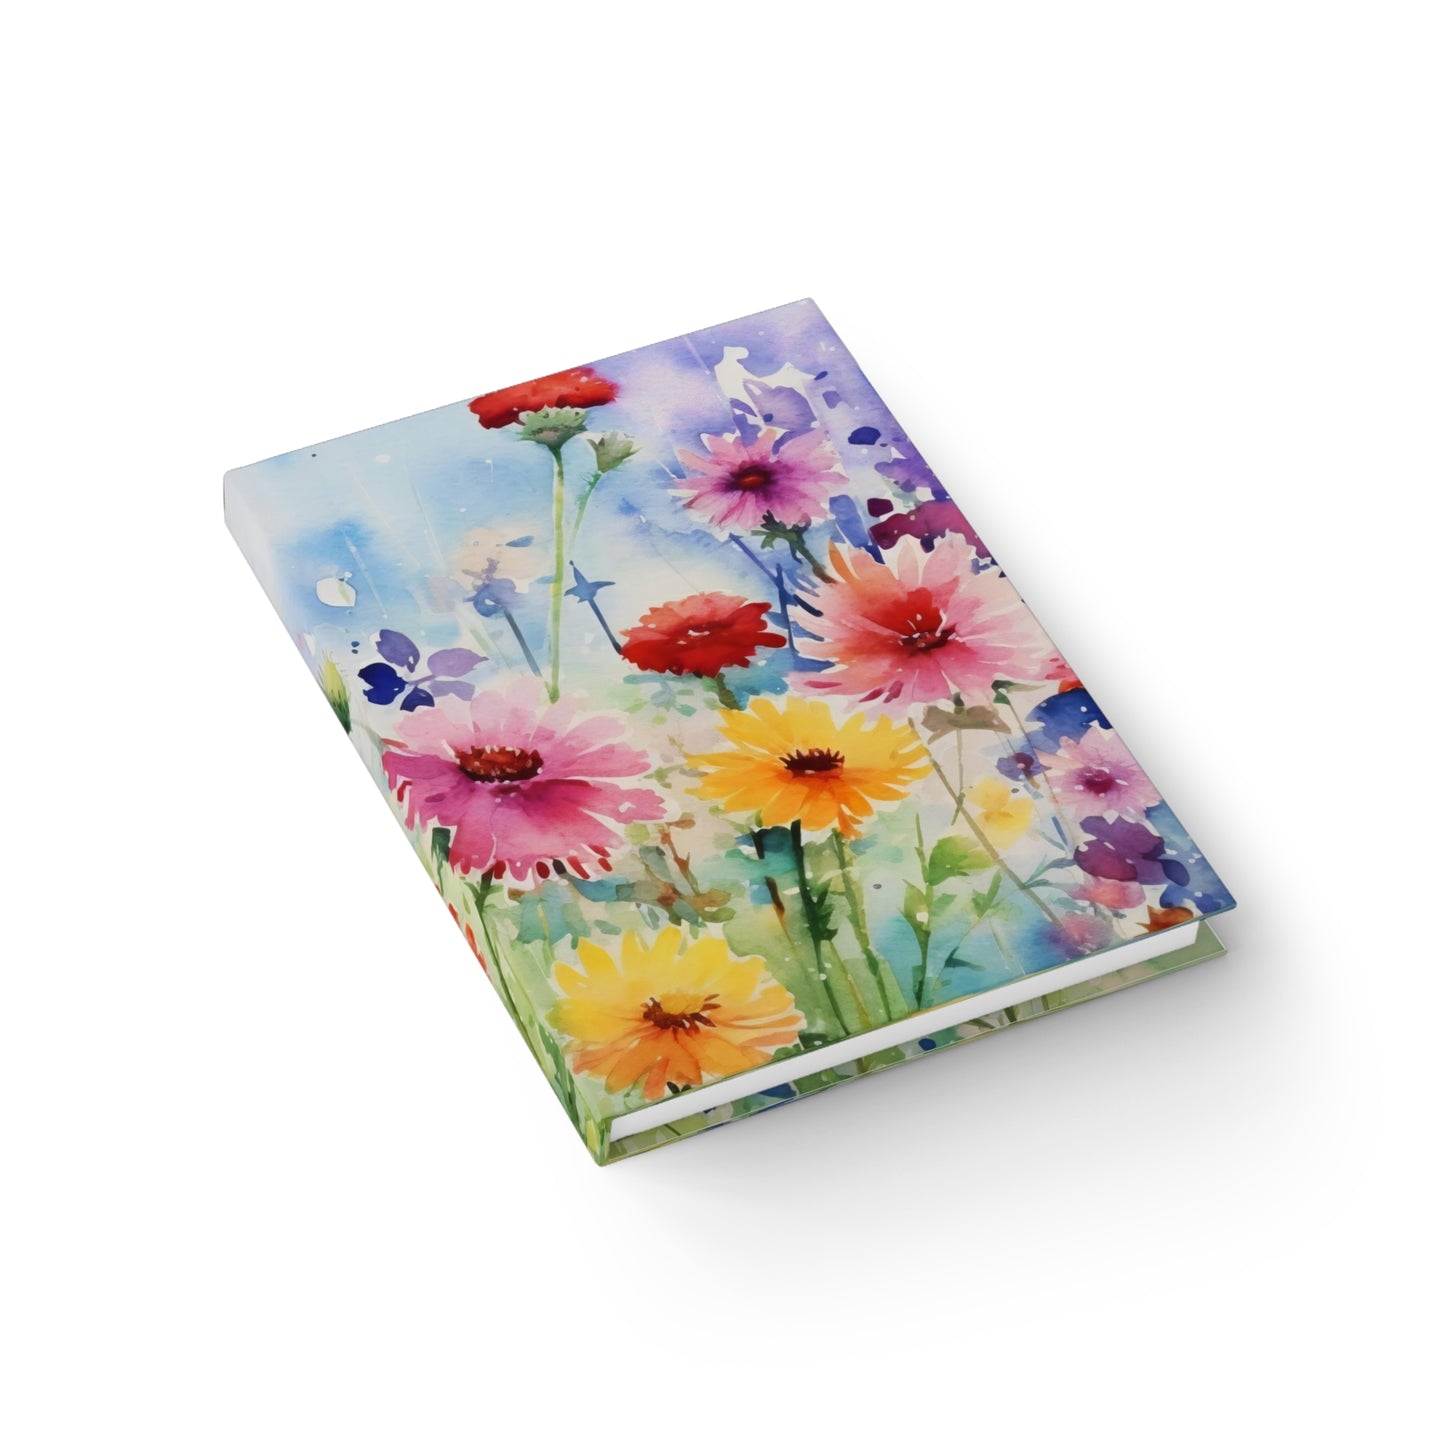 Watercolor Wildflowers Journal, Wild Flowers Diary, Gardening Notes, Floral Dream Journal, Hard Cover, Ruled Line